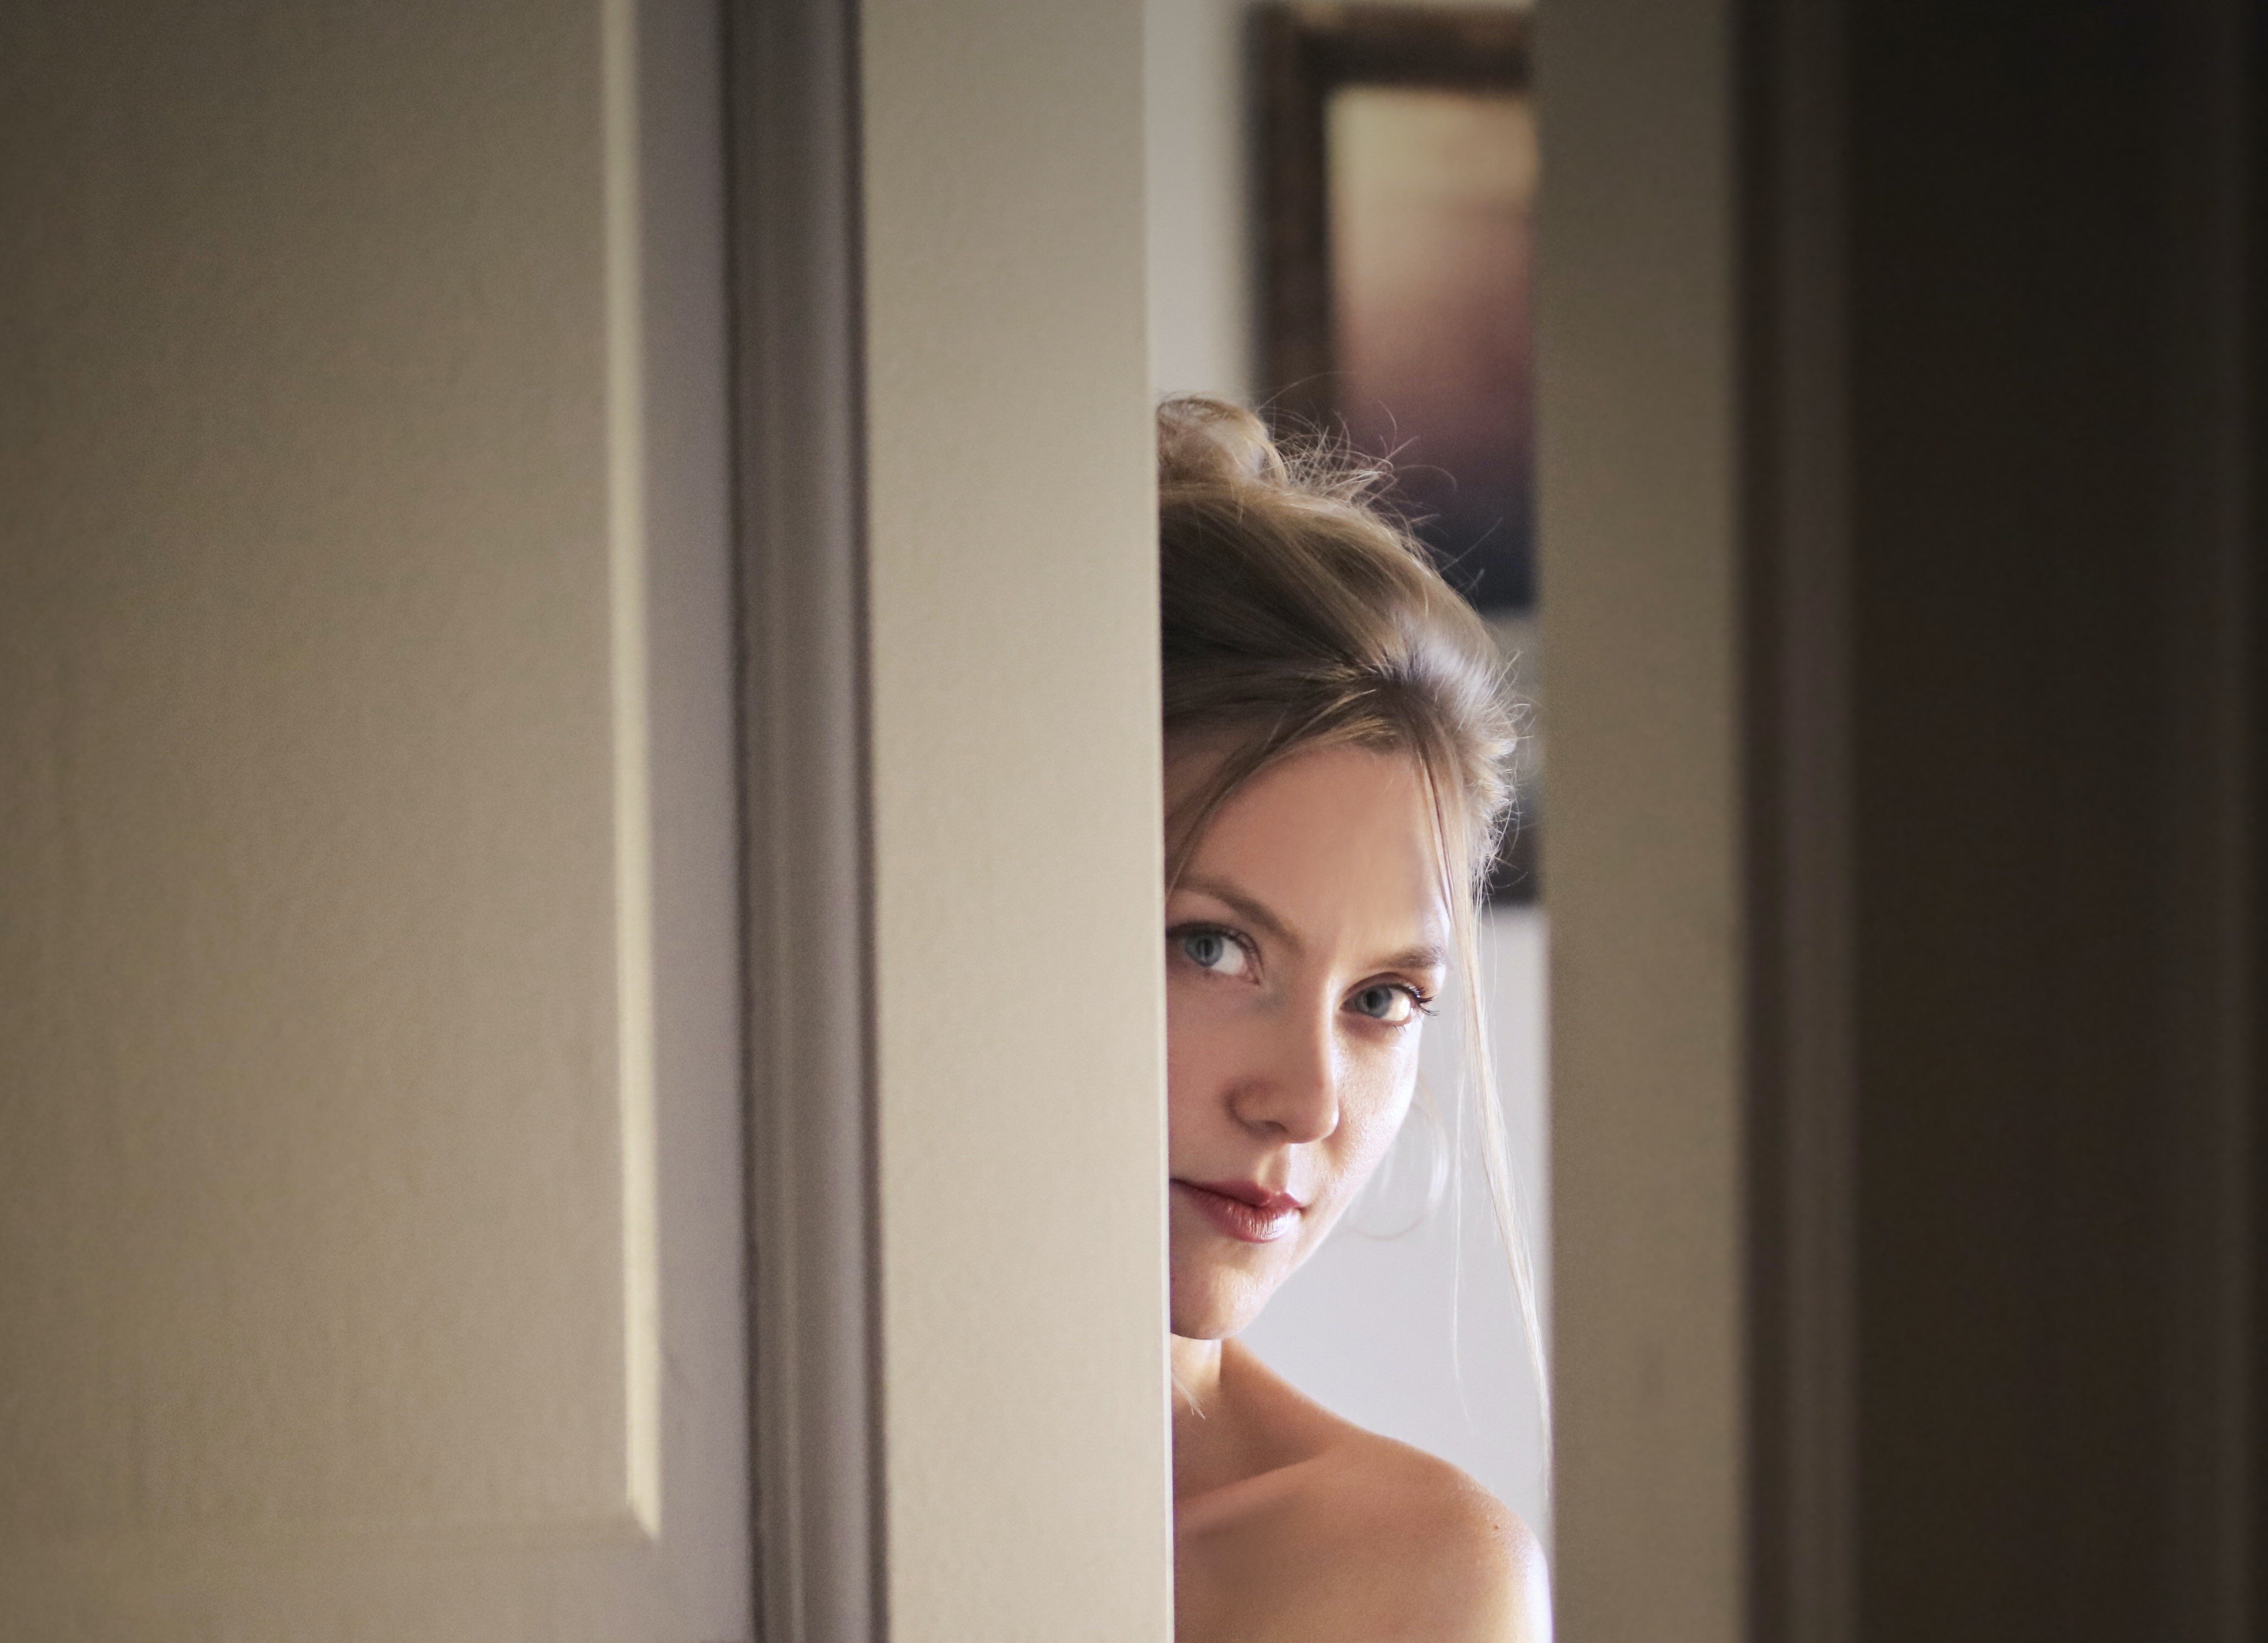 A young woman answered the door. | Source: Pexels